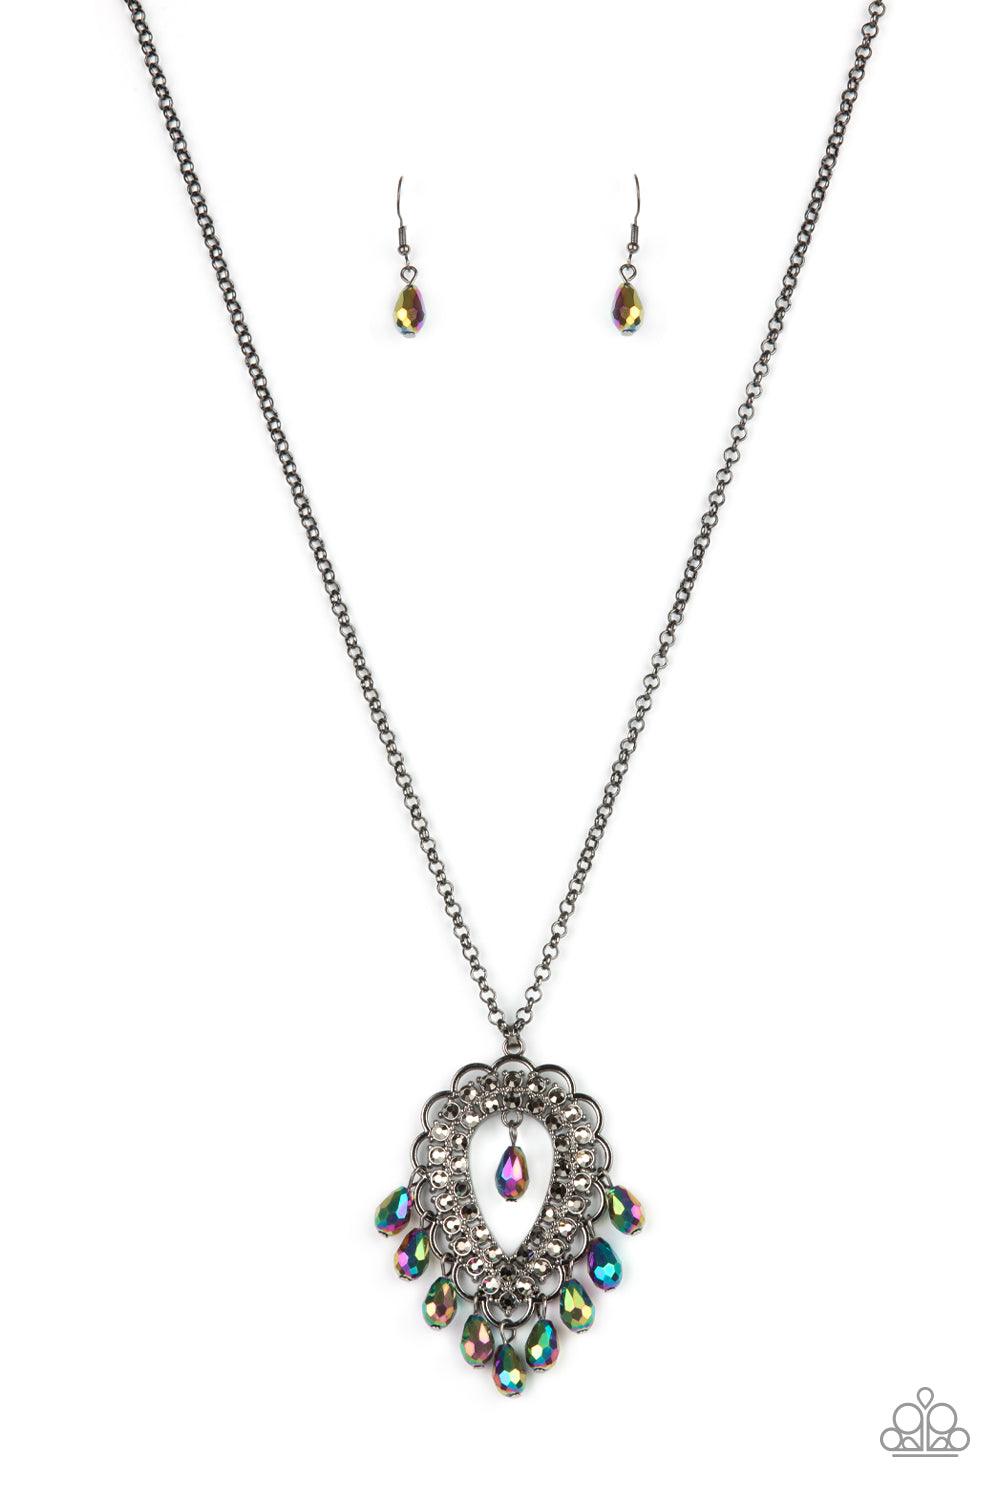 Paparazzi Accessories Teasable Teardrops - Multi An oversized scalloped teardrop frame, tipped on its point, encases rows of sparkling hematite rhinestones in its glimmery gunmetal fittings. Iridescent oil spill faceted teardrop beads dangle daintily from